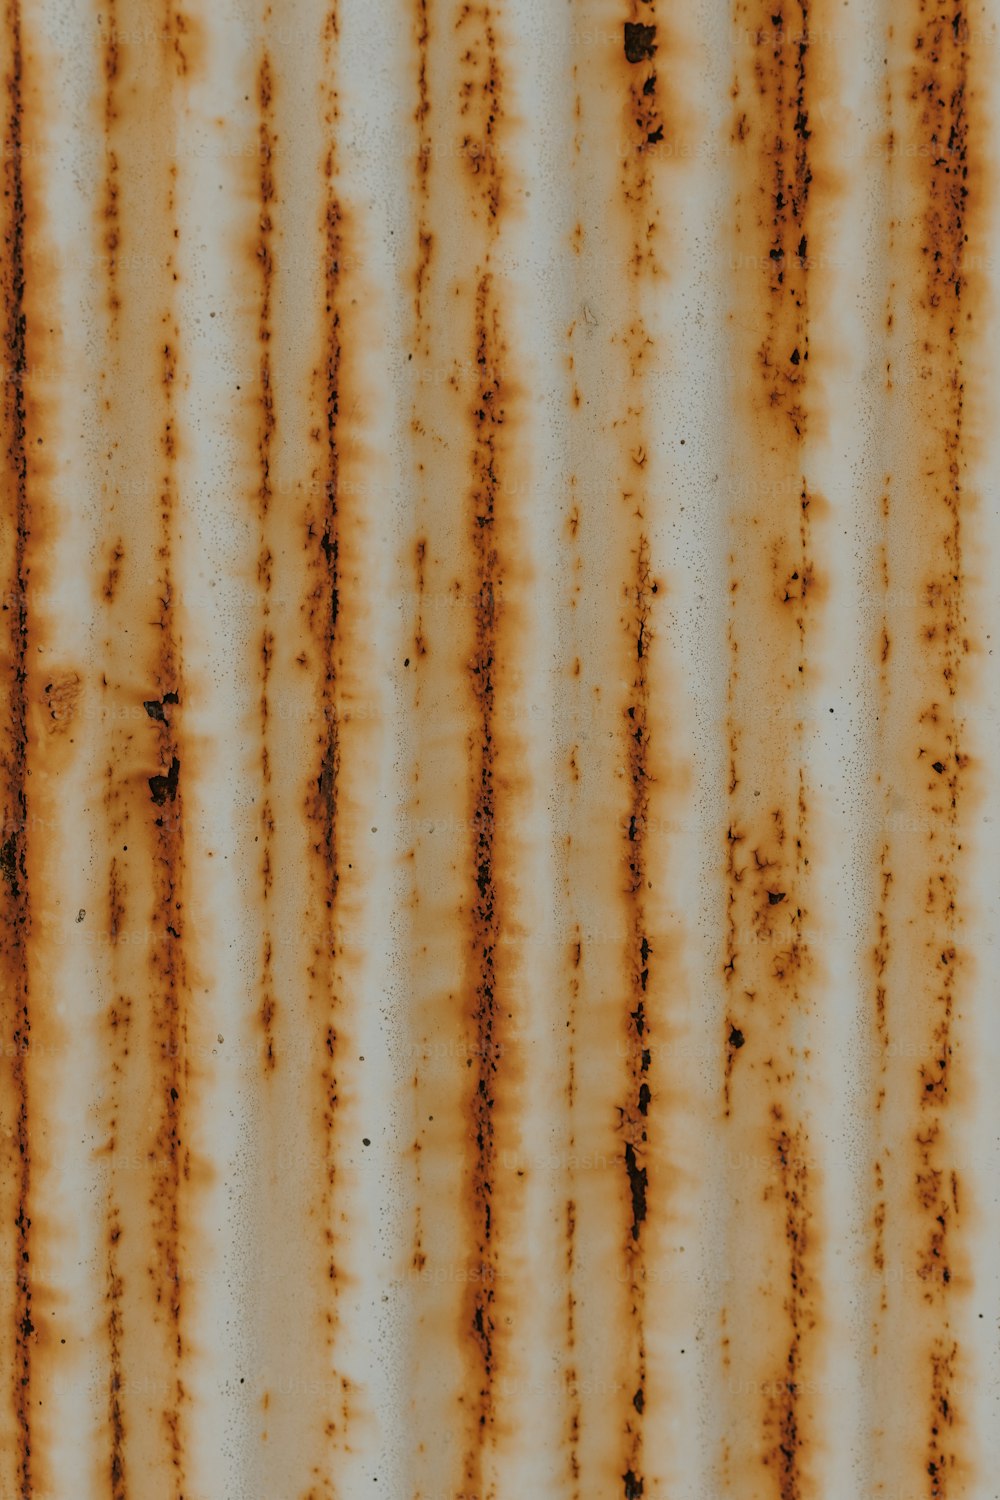 a rusted metal surface with brown spots